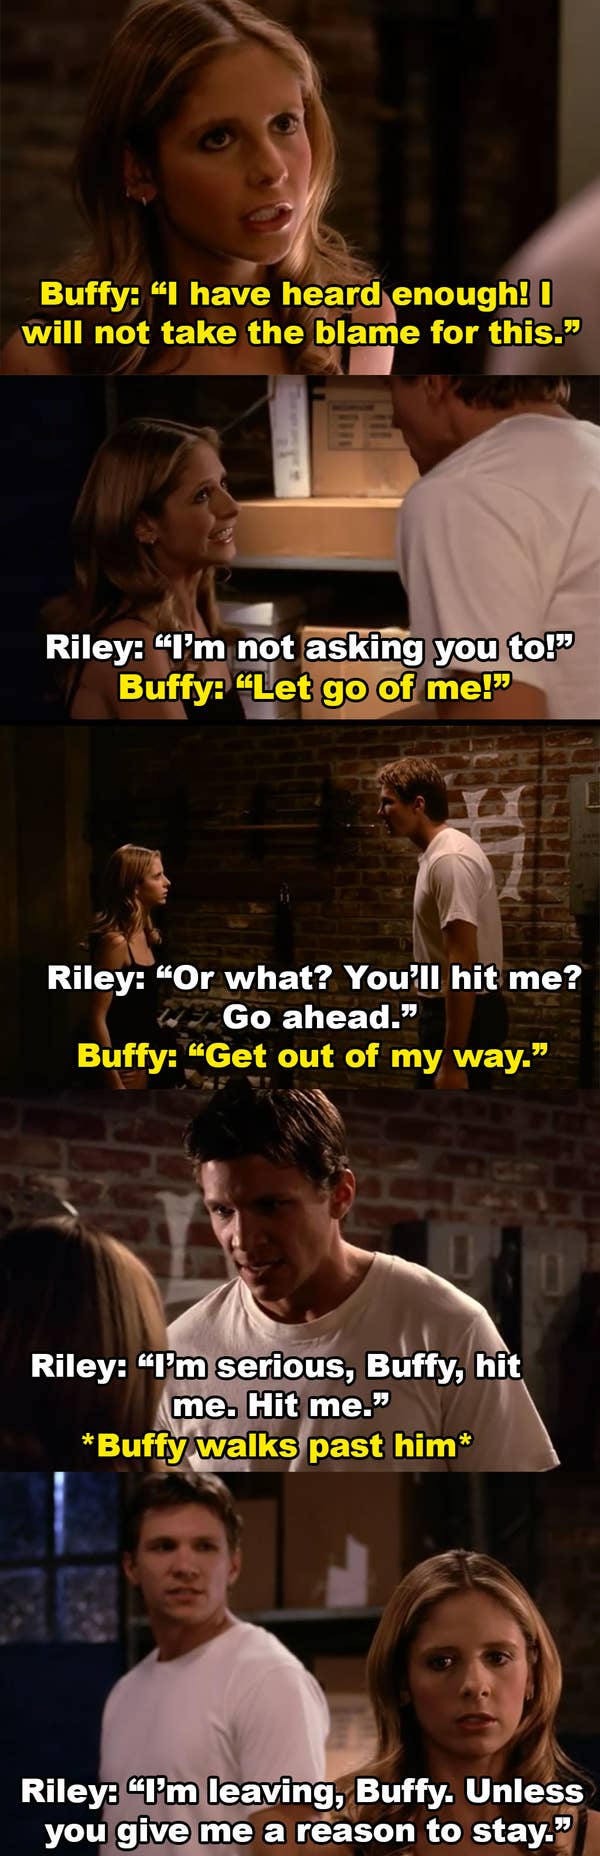 Buffy tries to leave and says she won&#x27;t take the blame for this. Riley grabs her and then asks her to hit him when she tries to get him to stop. She walks away and Riley tells her he&#x27;s leaving unless she gives him a reason to stay